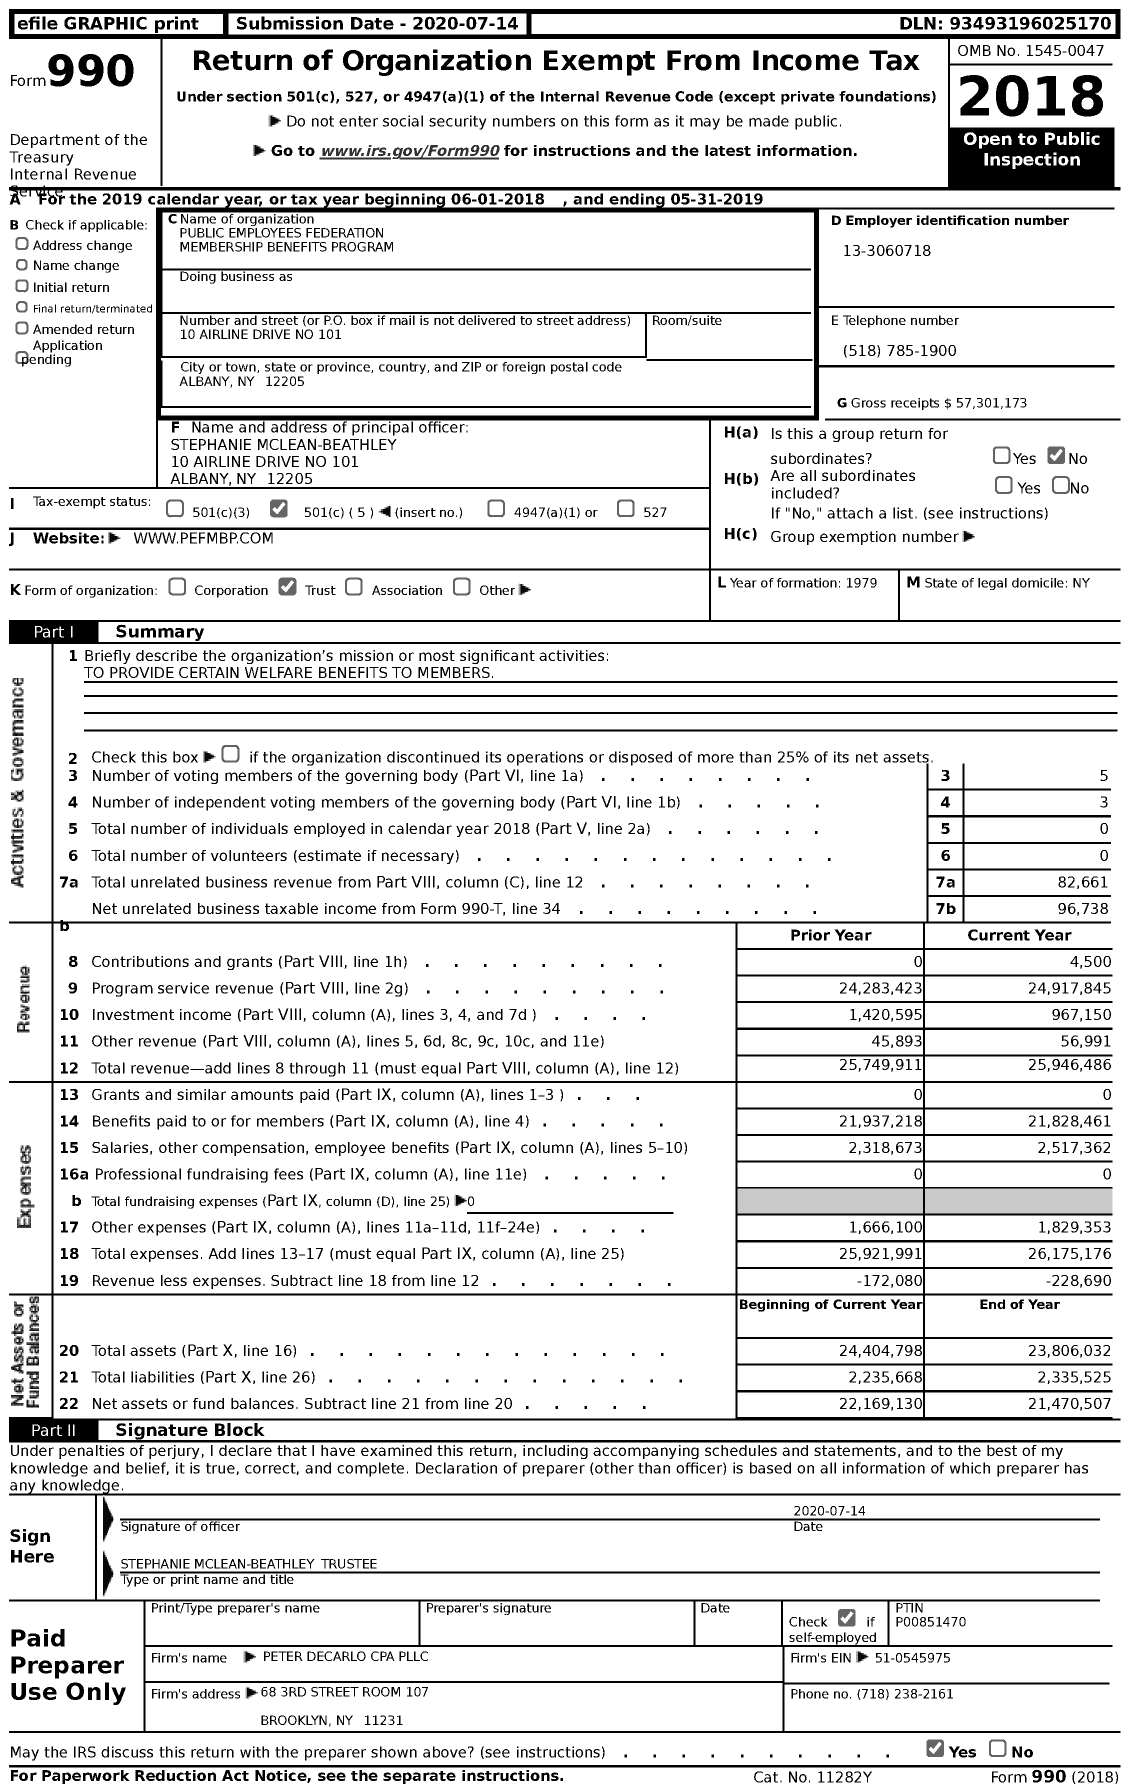 Image of first page of 2018 Form 990 for Public Employees Federation Membership Benefits Program